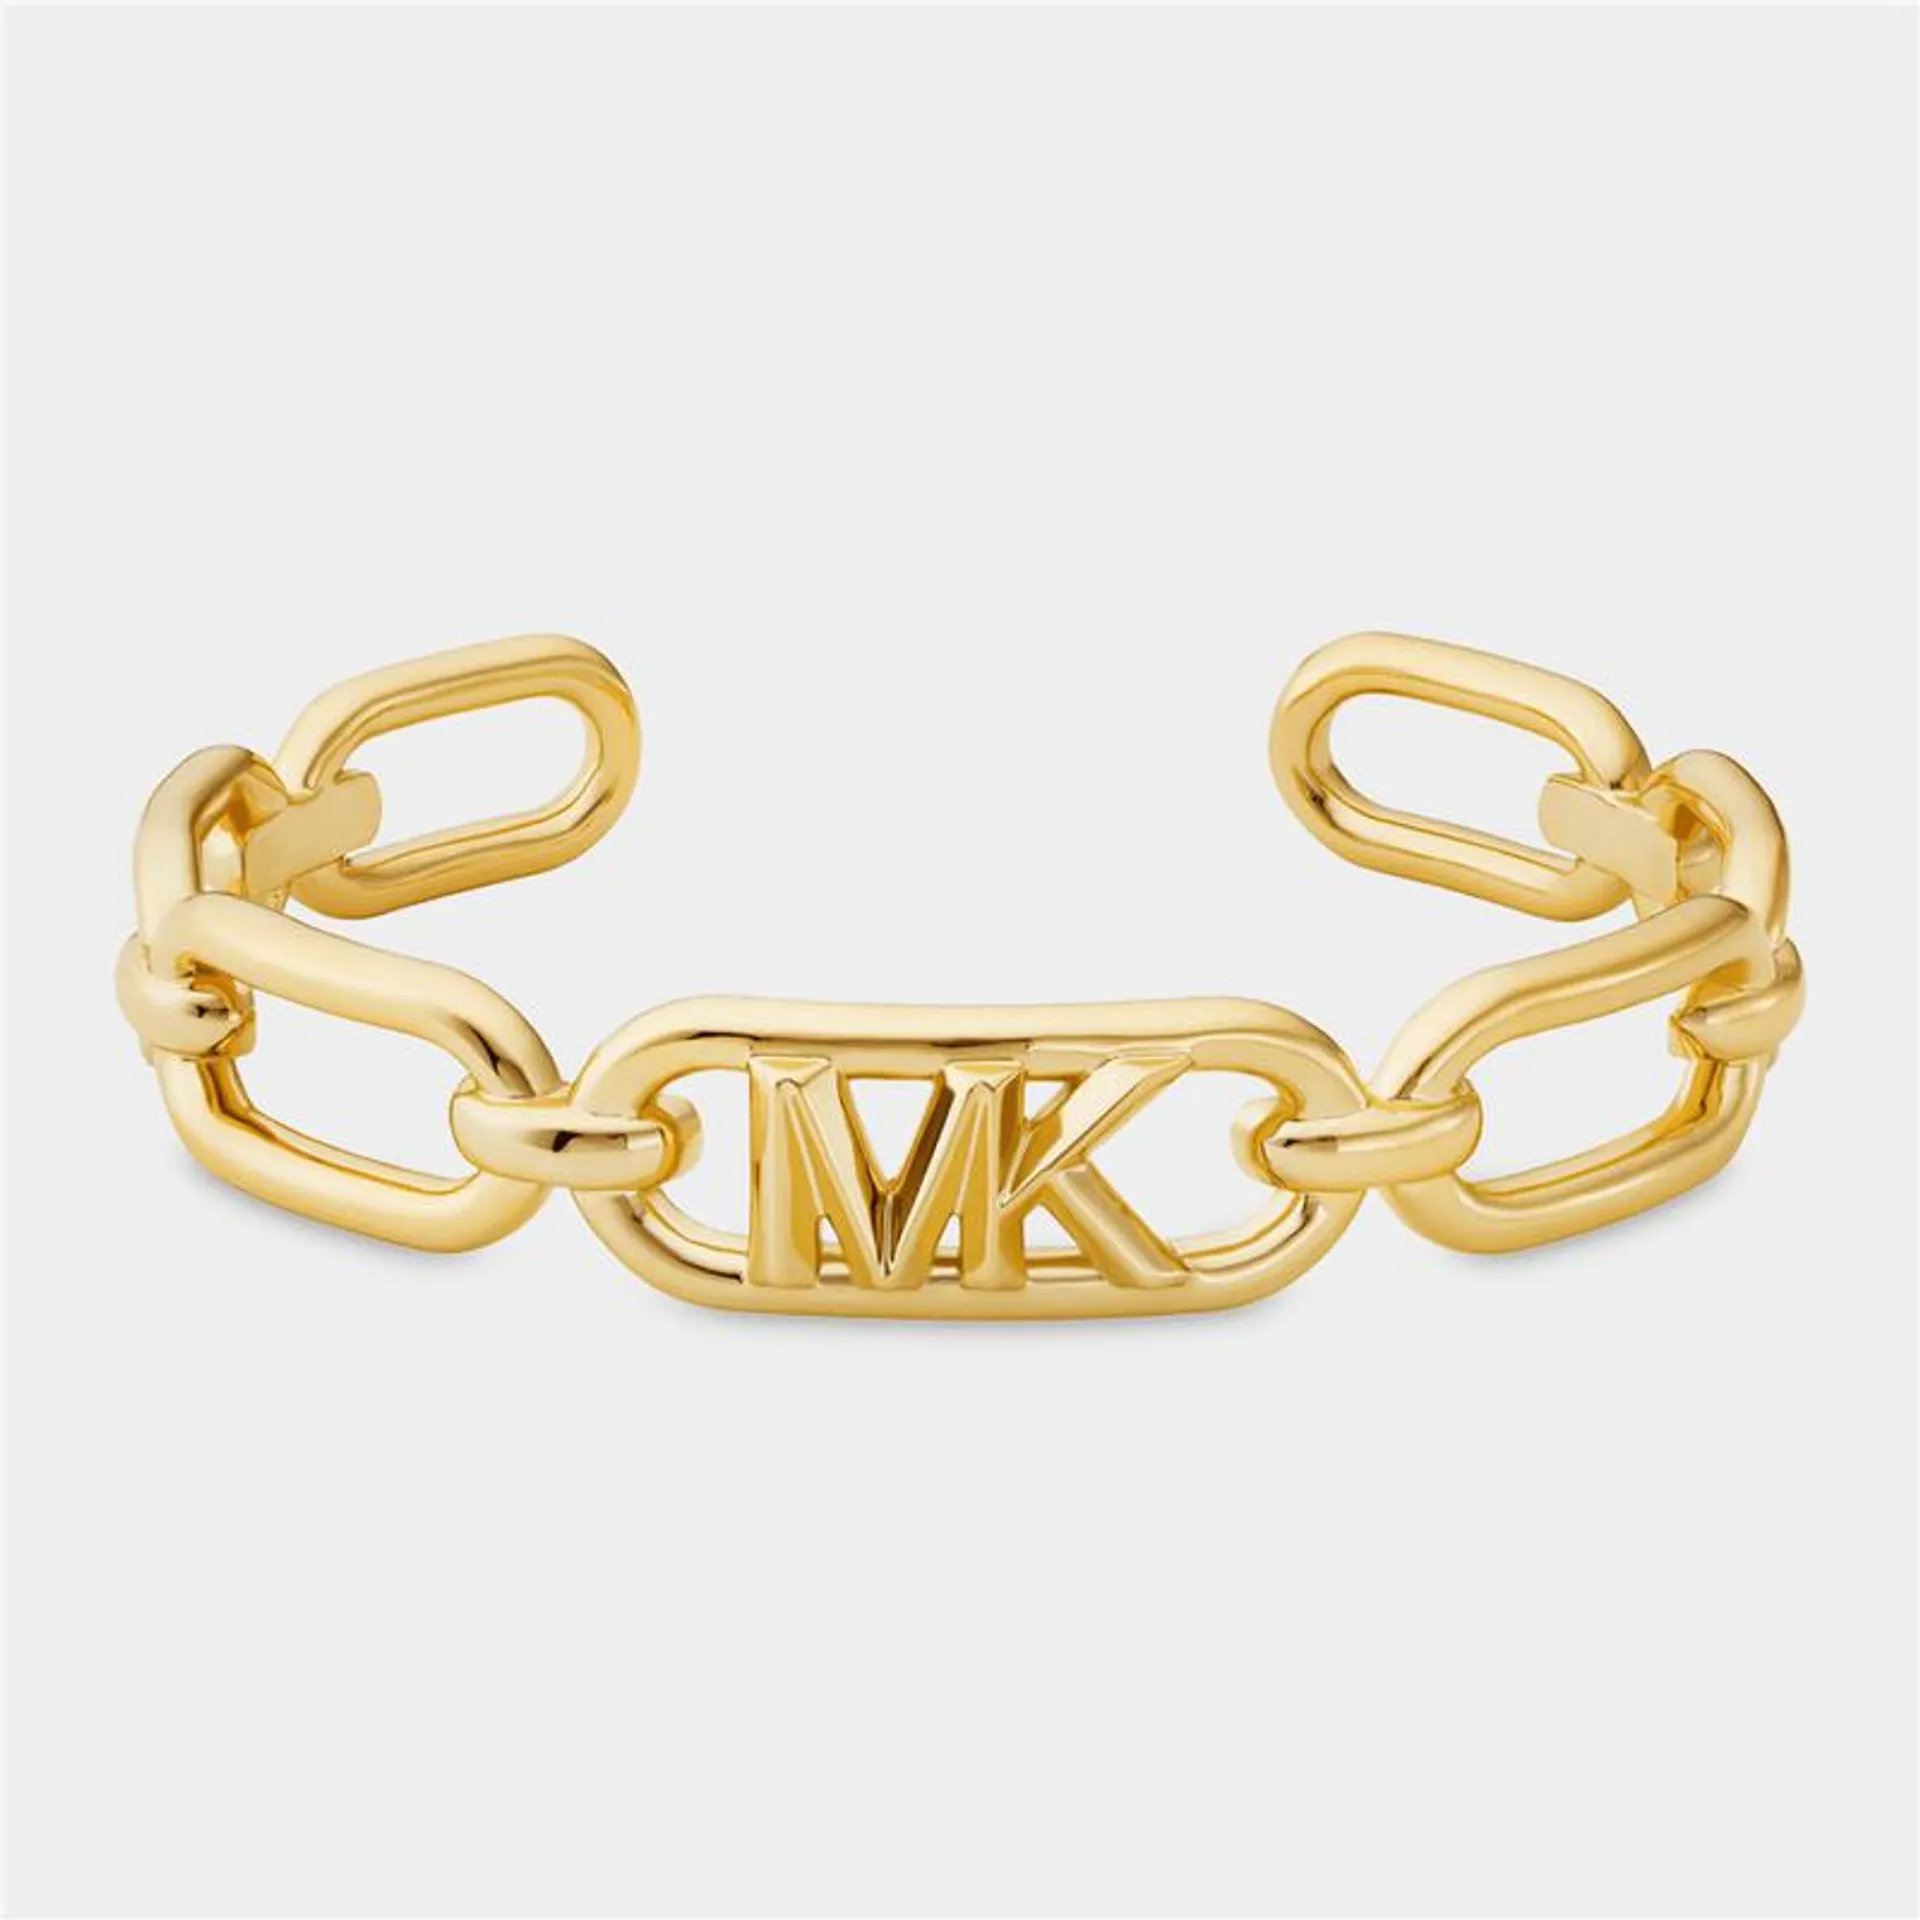 Michael Kors MK Statement Link Collection Gold Plated Frozen Empire Link Cuff Bangle